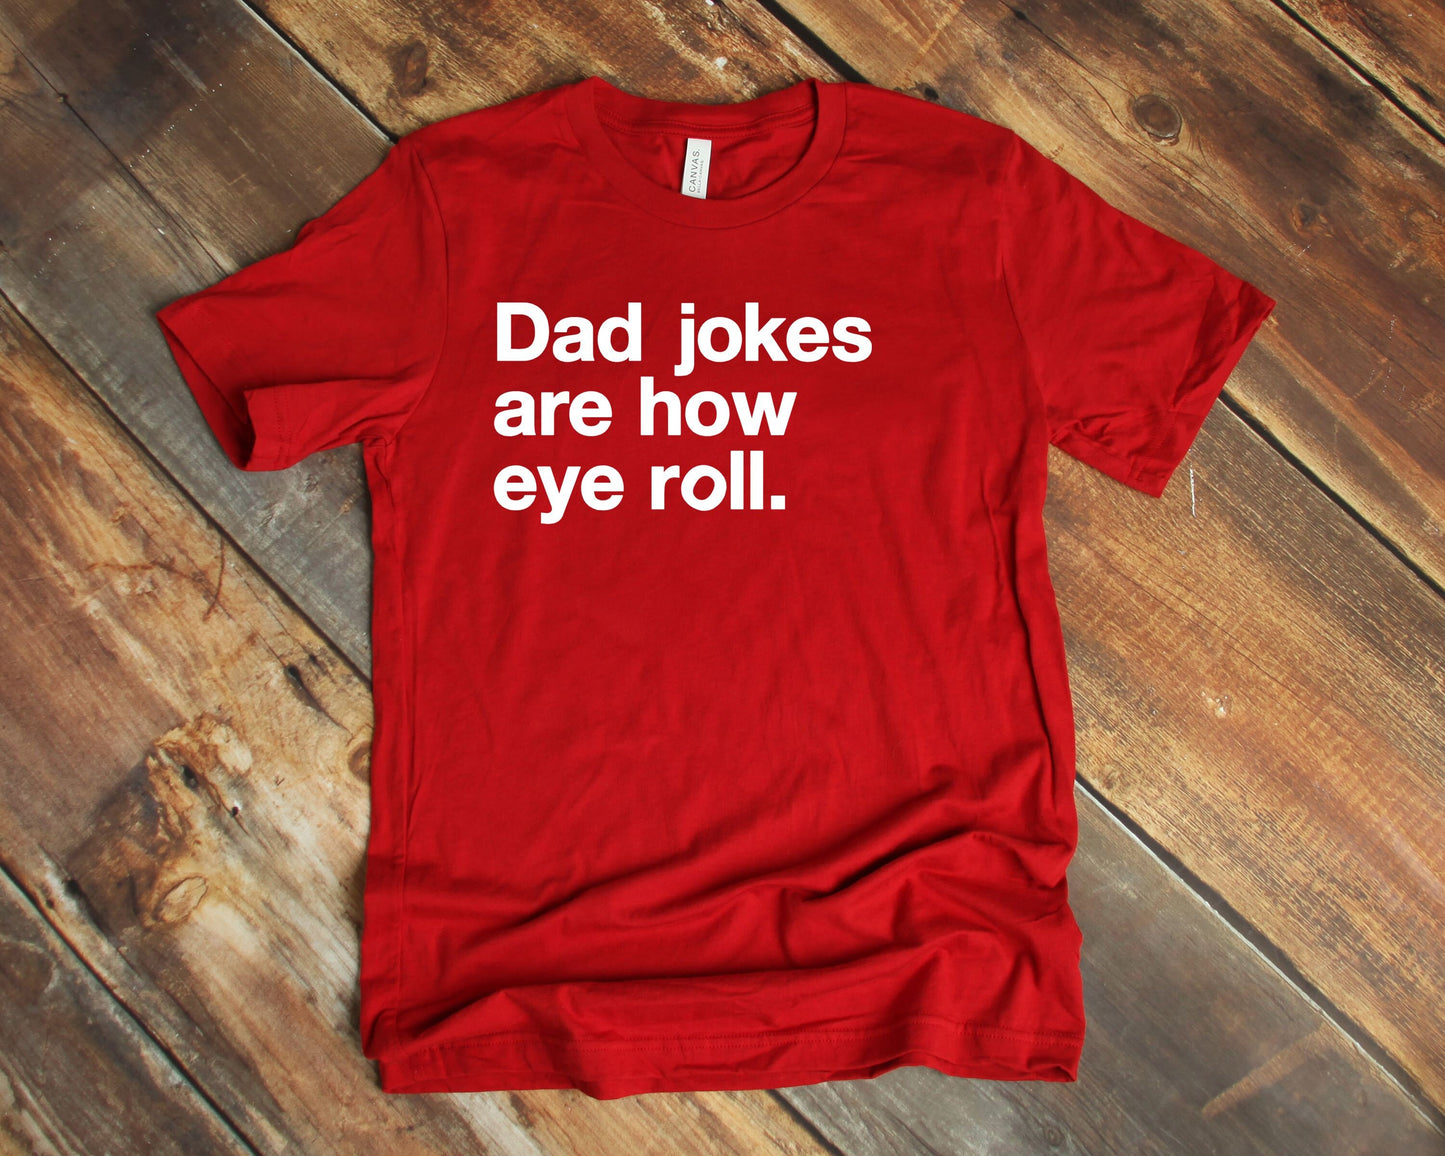 Dad Jokes are How Eye Roll Shirt - Father's Day Shirt - Dad Jokes Shirt - Gifts for Dad - Dad Birthday Gift - Dad Joke Shirt